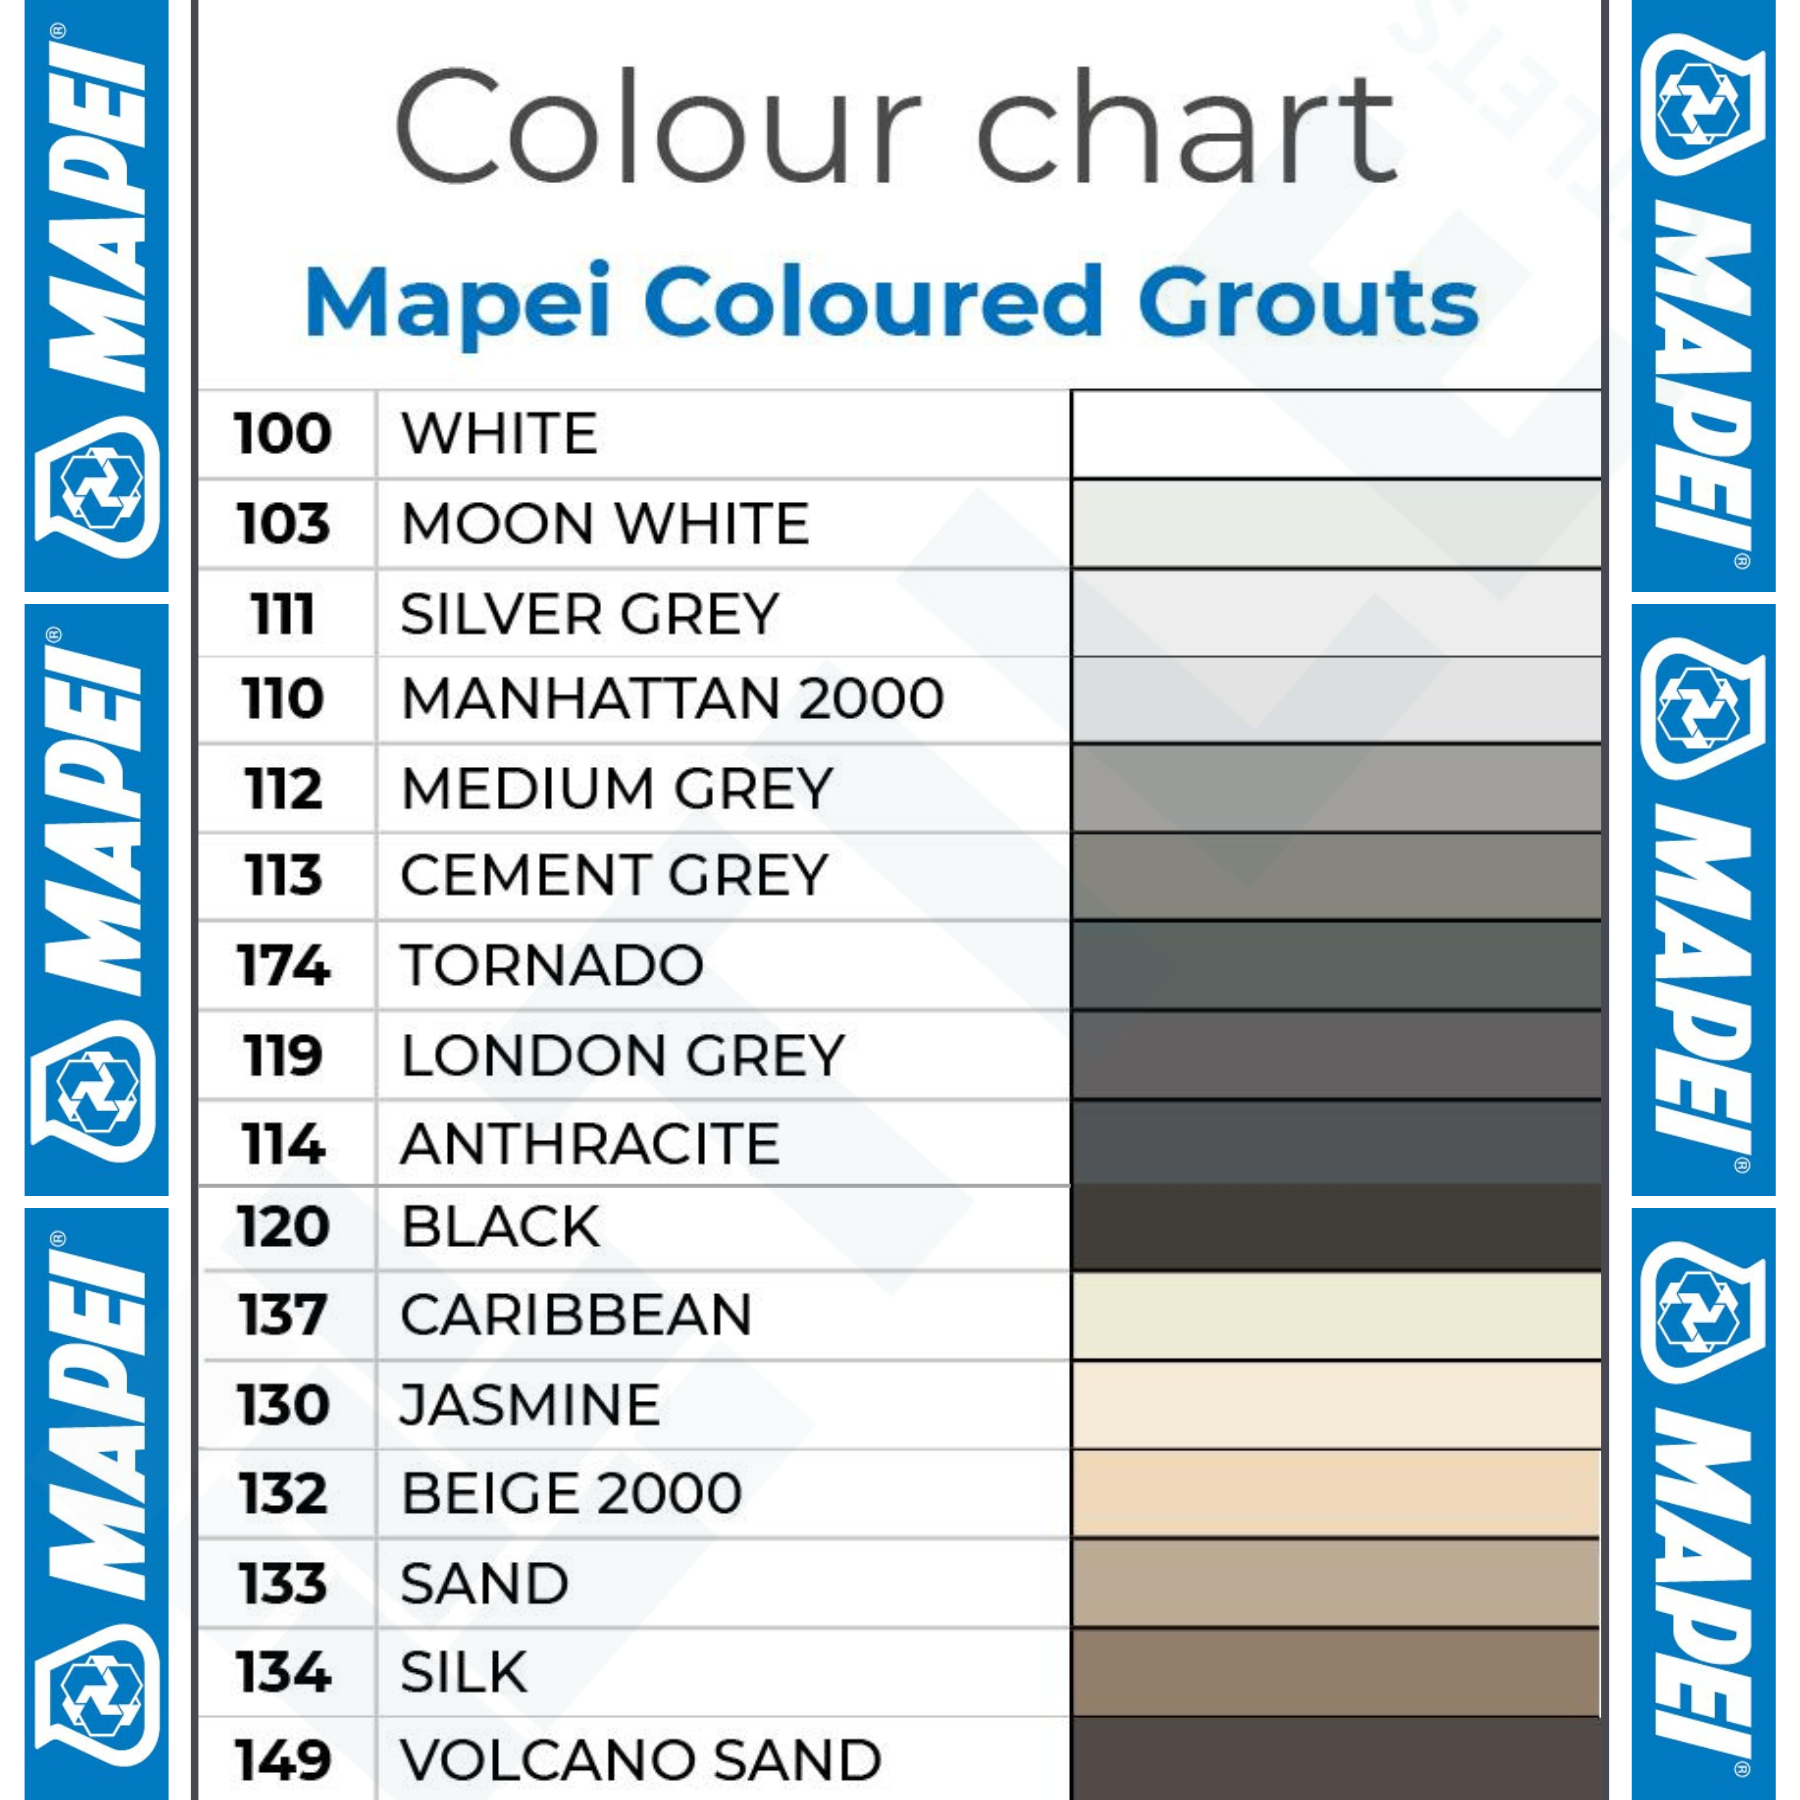 Mapei UltraColour Plus Silver Grey 111 Grout